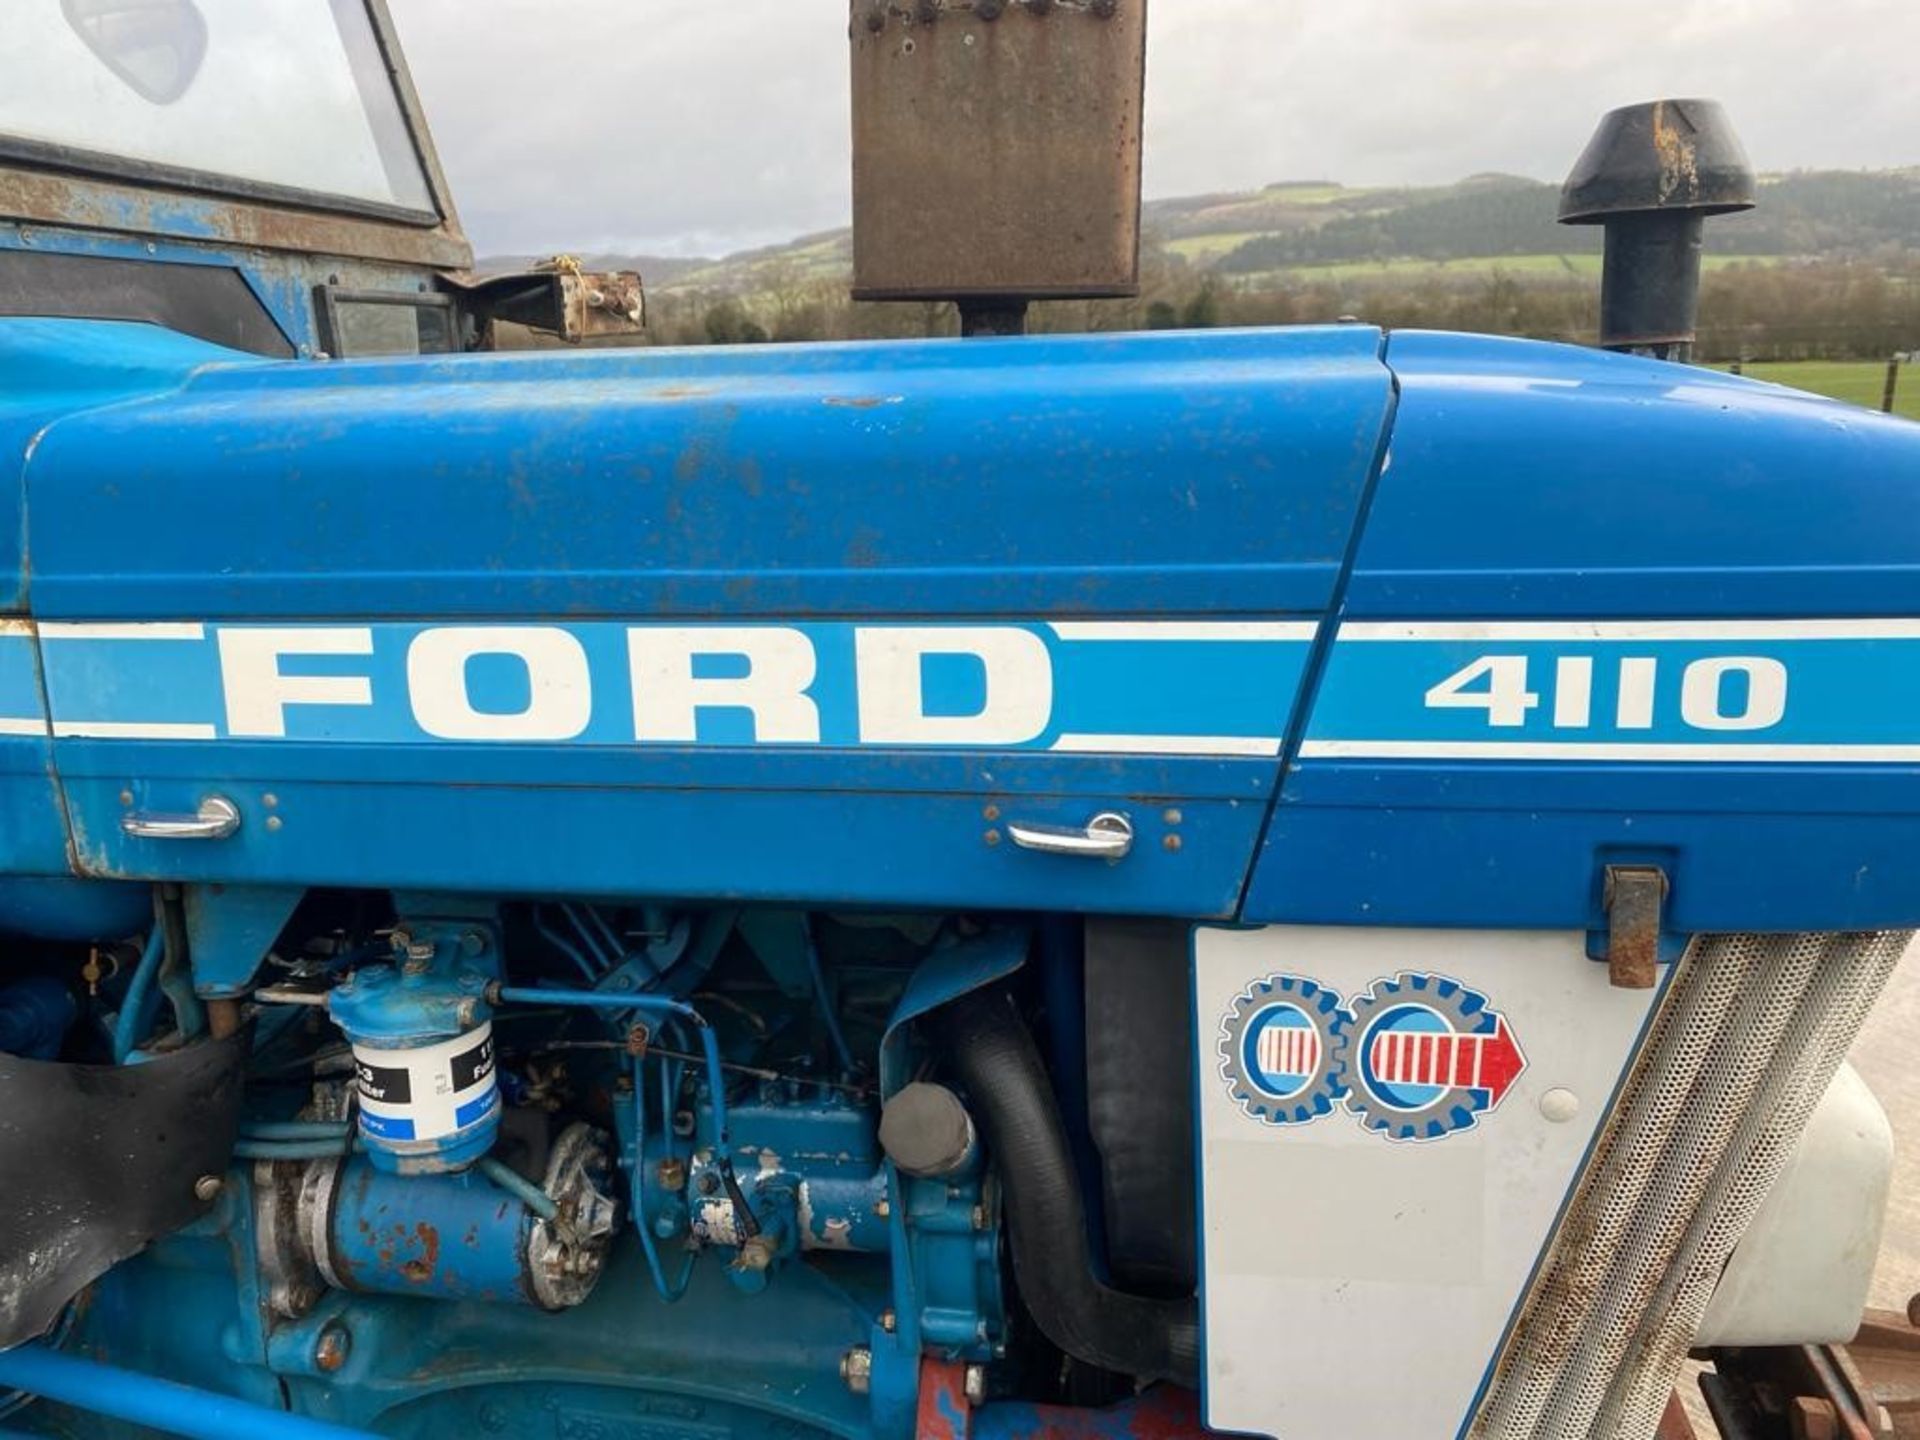 1982 FORD 4110 TRACTOR - Image 2 of 18